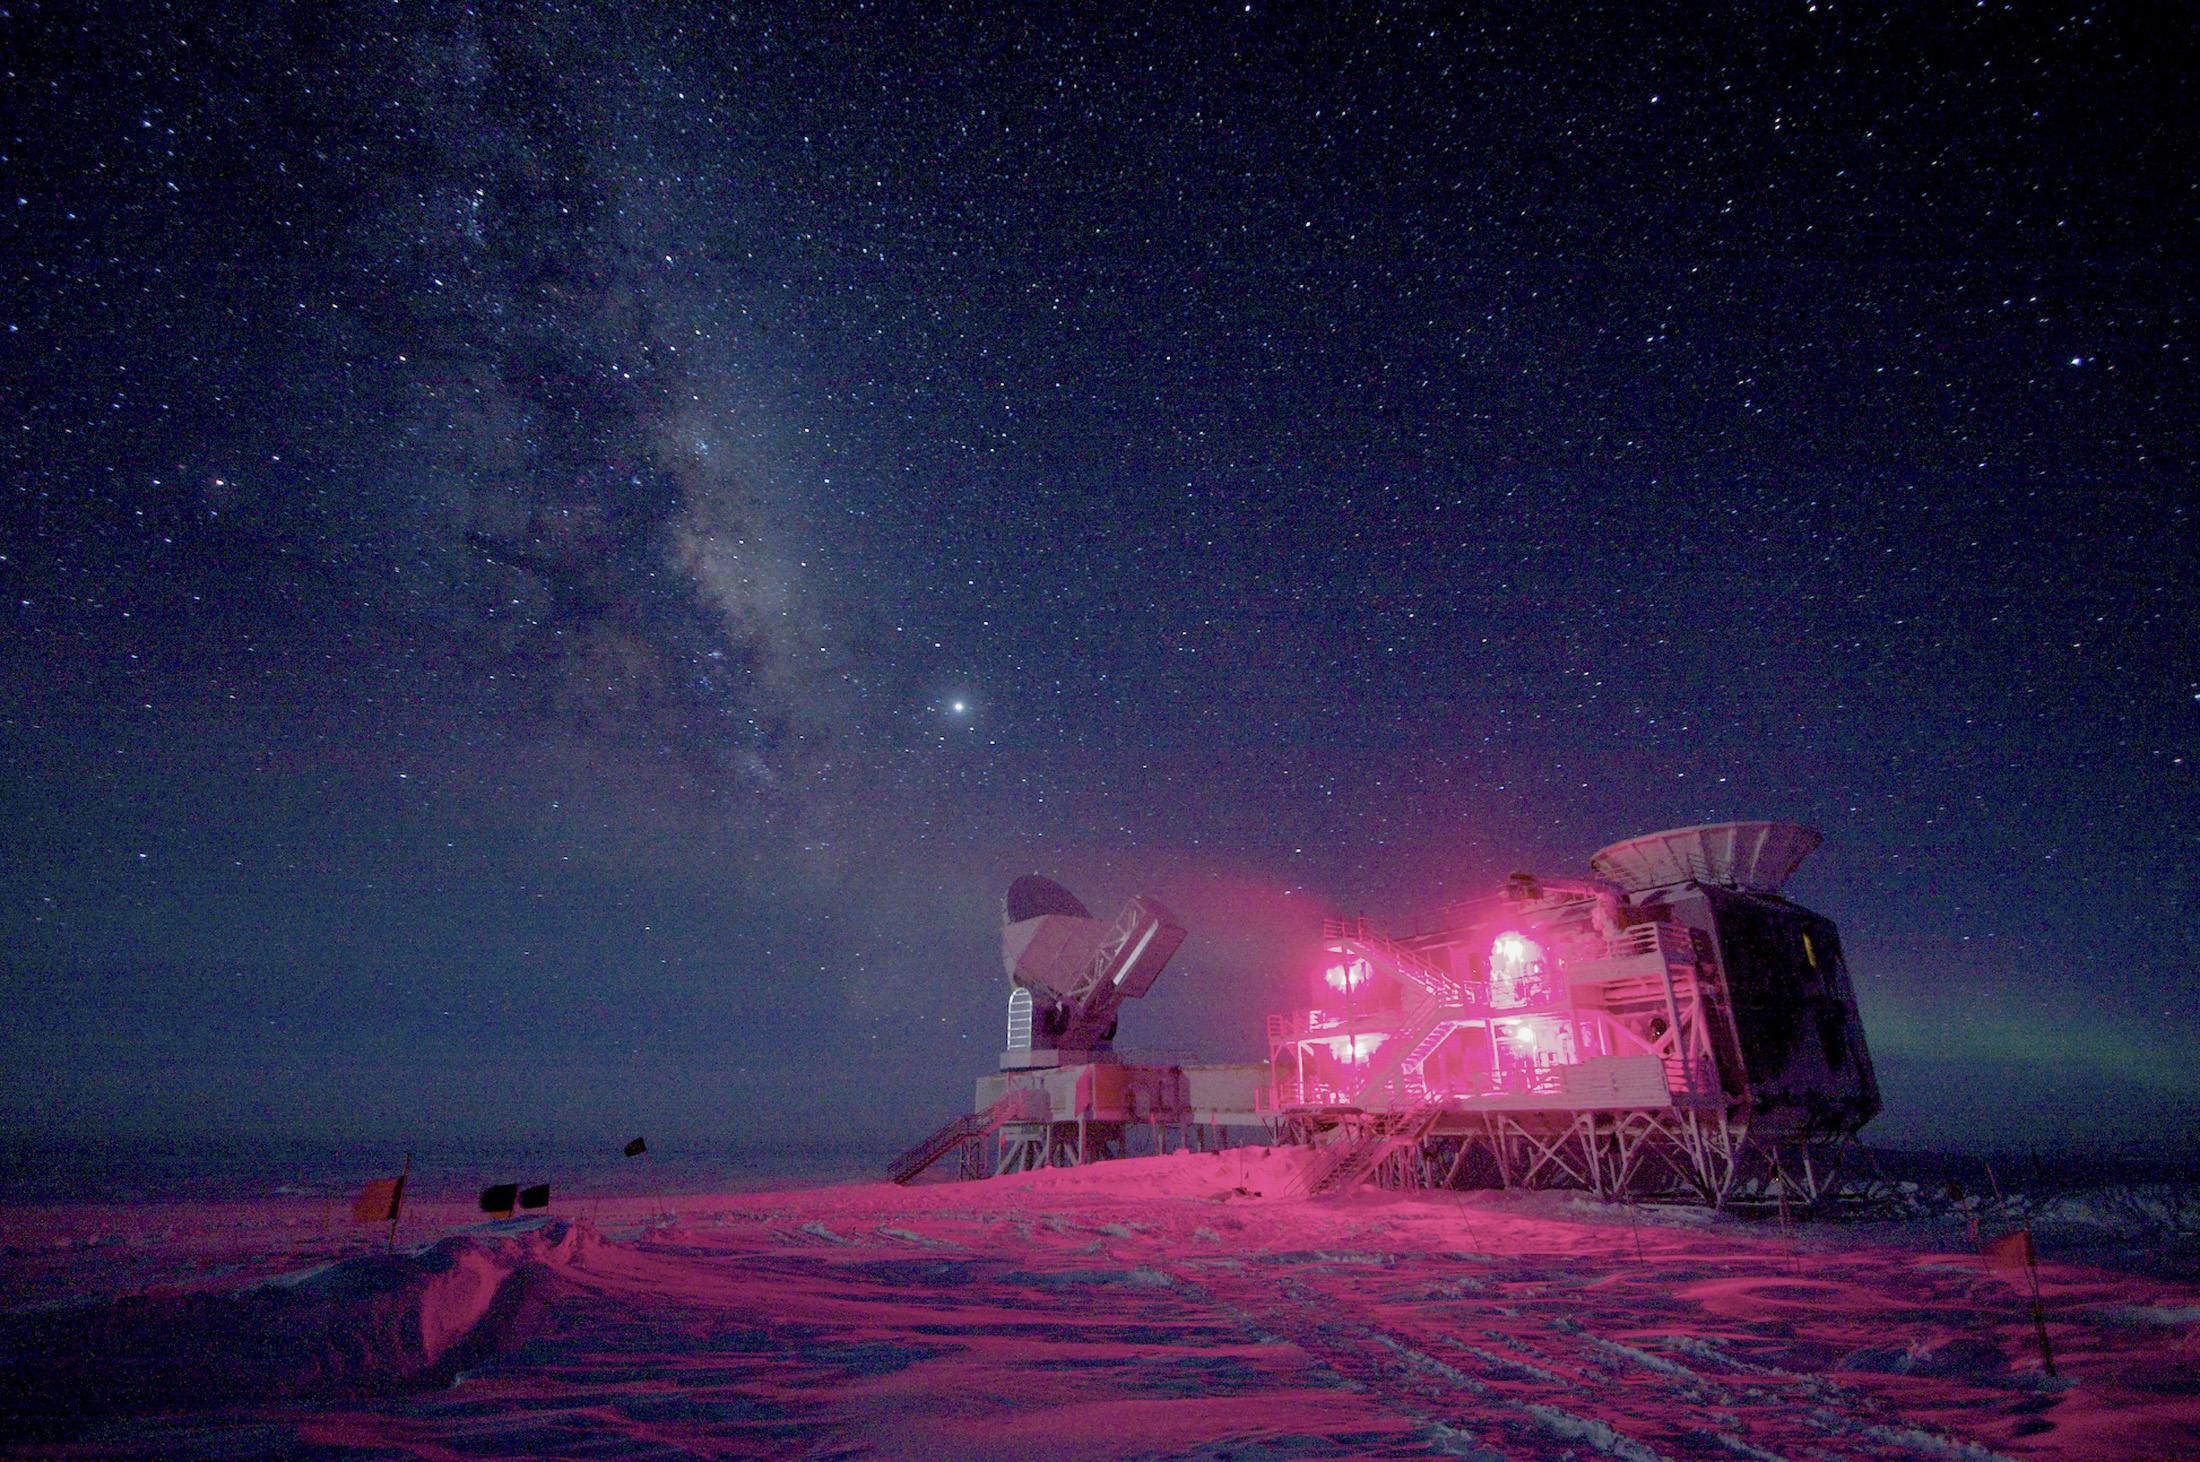 The 10-meter-wide South Pole telescope and the BICEP2 (Background Imaging of Cosmic Extragalactic Polarization) telescope at Amundsen-Scott South Pole Station is seen against the night sky with the Milky Way in August 2008. | REUTERS